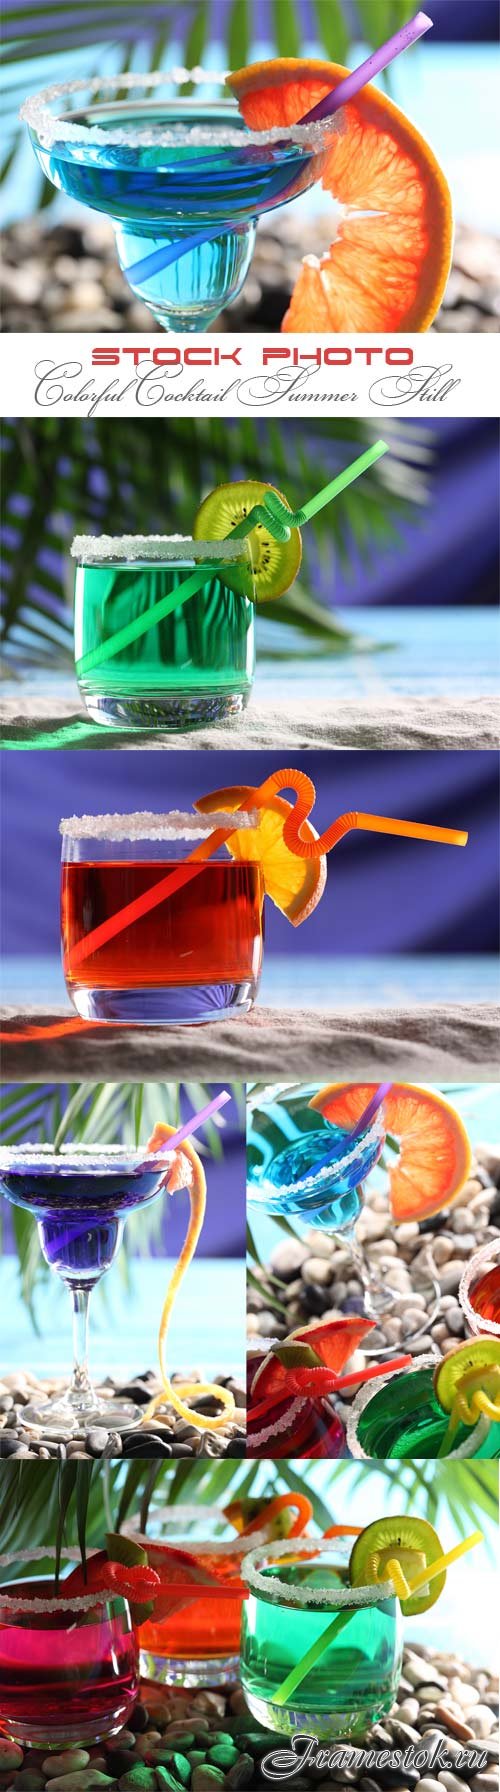 Colorful Cocktail Summer Still